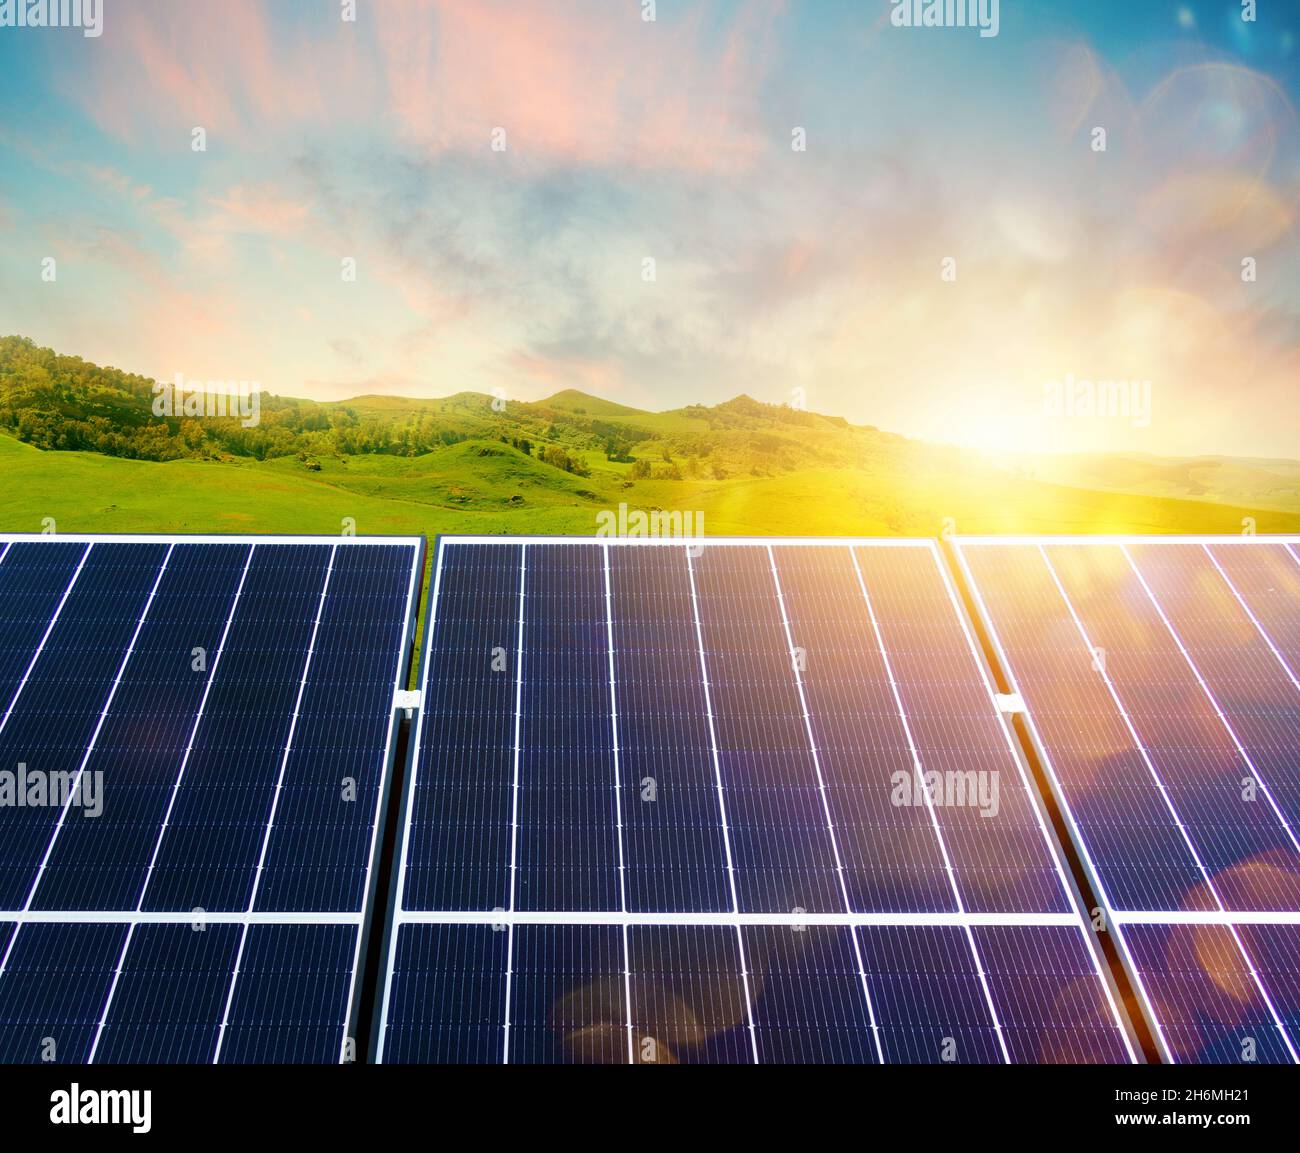 Renewable energy system with solar panel and green mountain Stock Photo